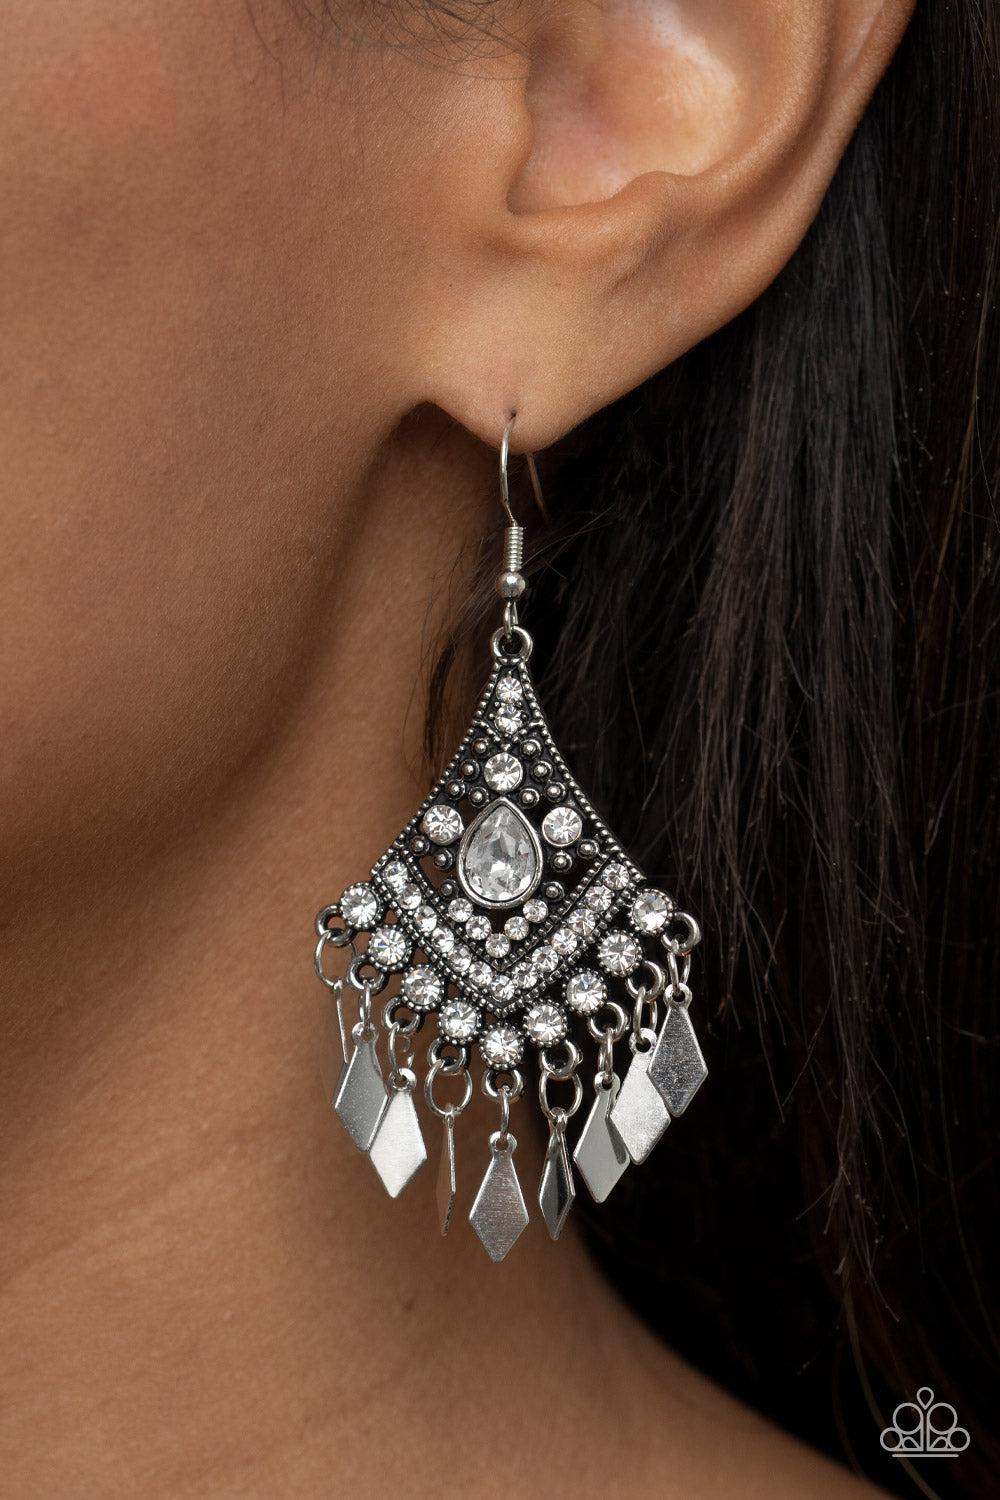 Indie Iridescence White Earrings - Paparazzi Accessories- lightbox - CarasShop.com - $5 Jewelry by Cara Jewels